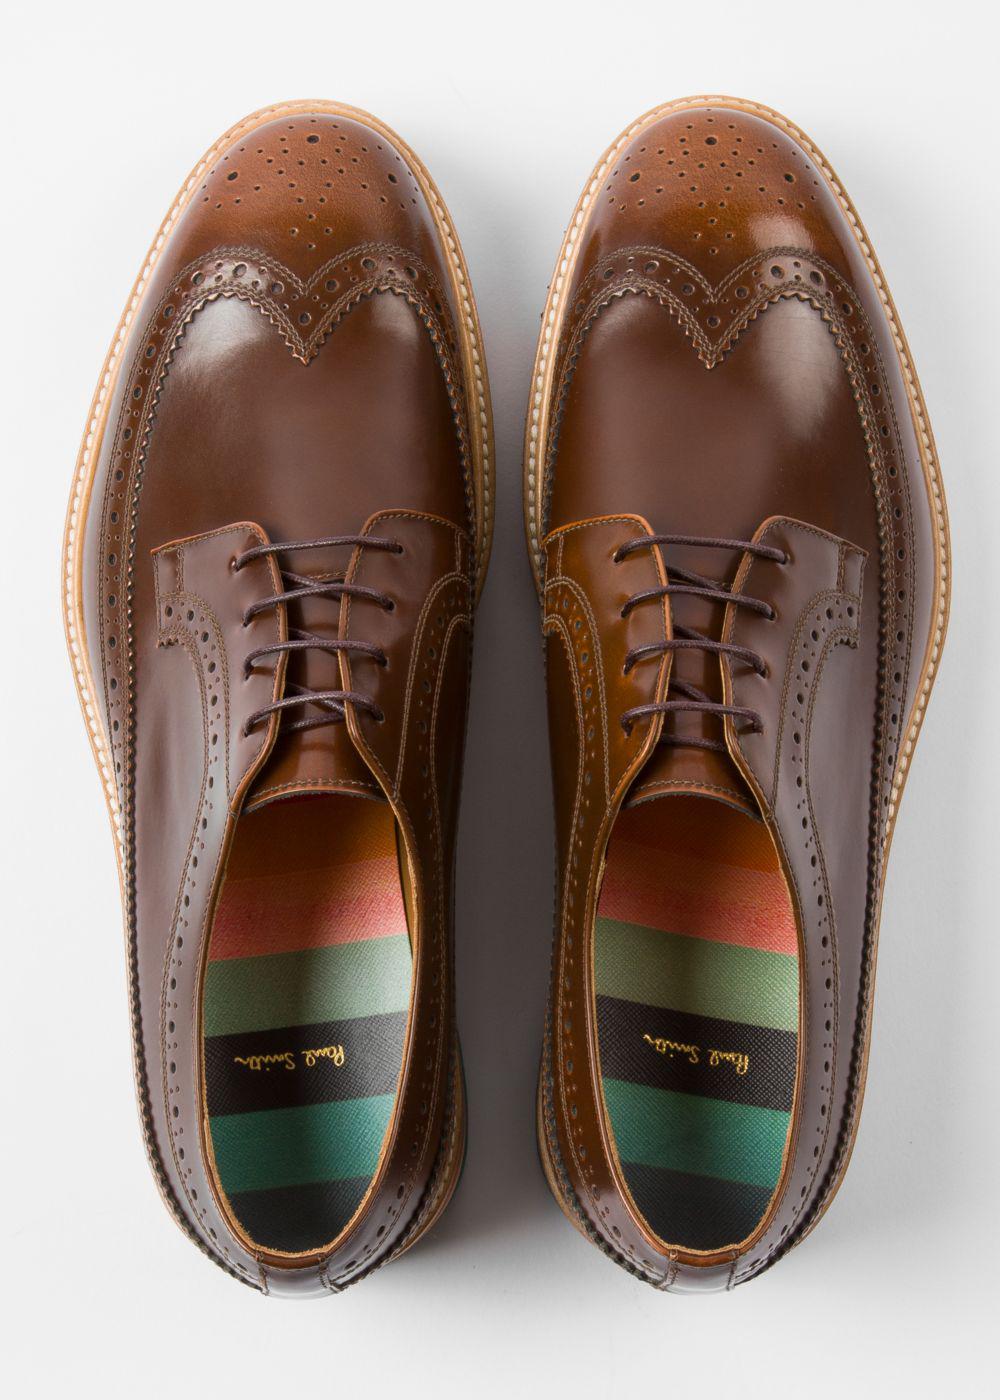 Lyst - Paul Smith Men's Dark Tan Leather 'grand' Brogues With 'artist ...